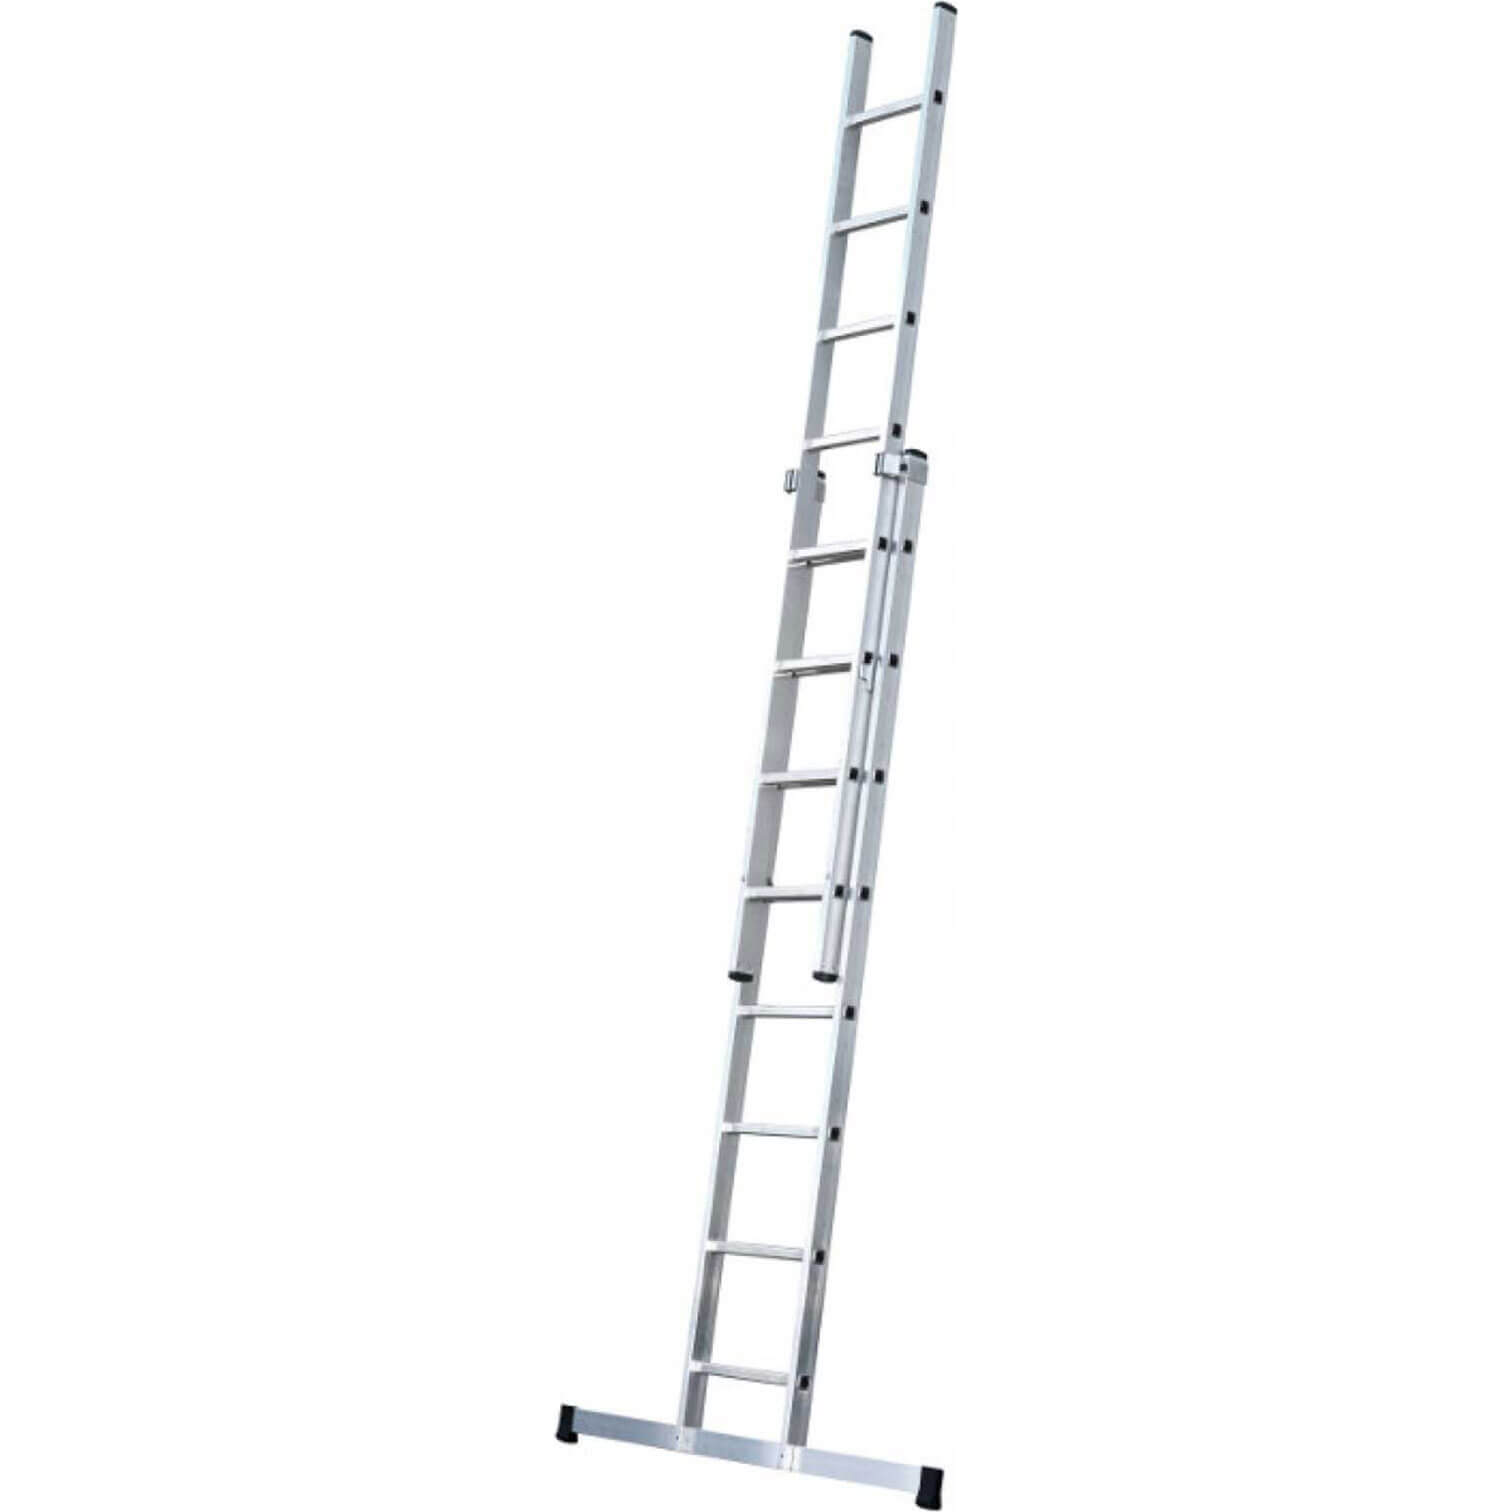 Photo of Youngman Trade 200 3 Section Extension Ladder 7.4m